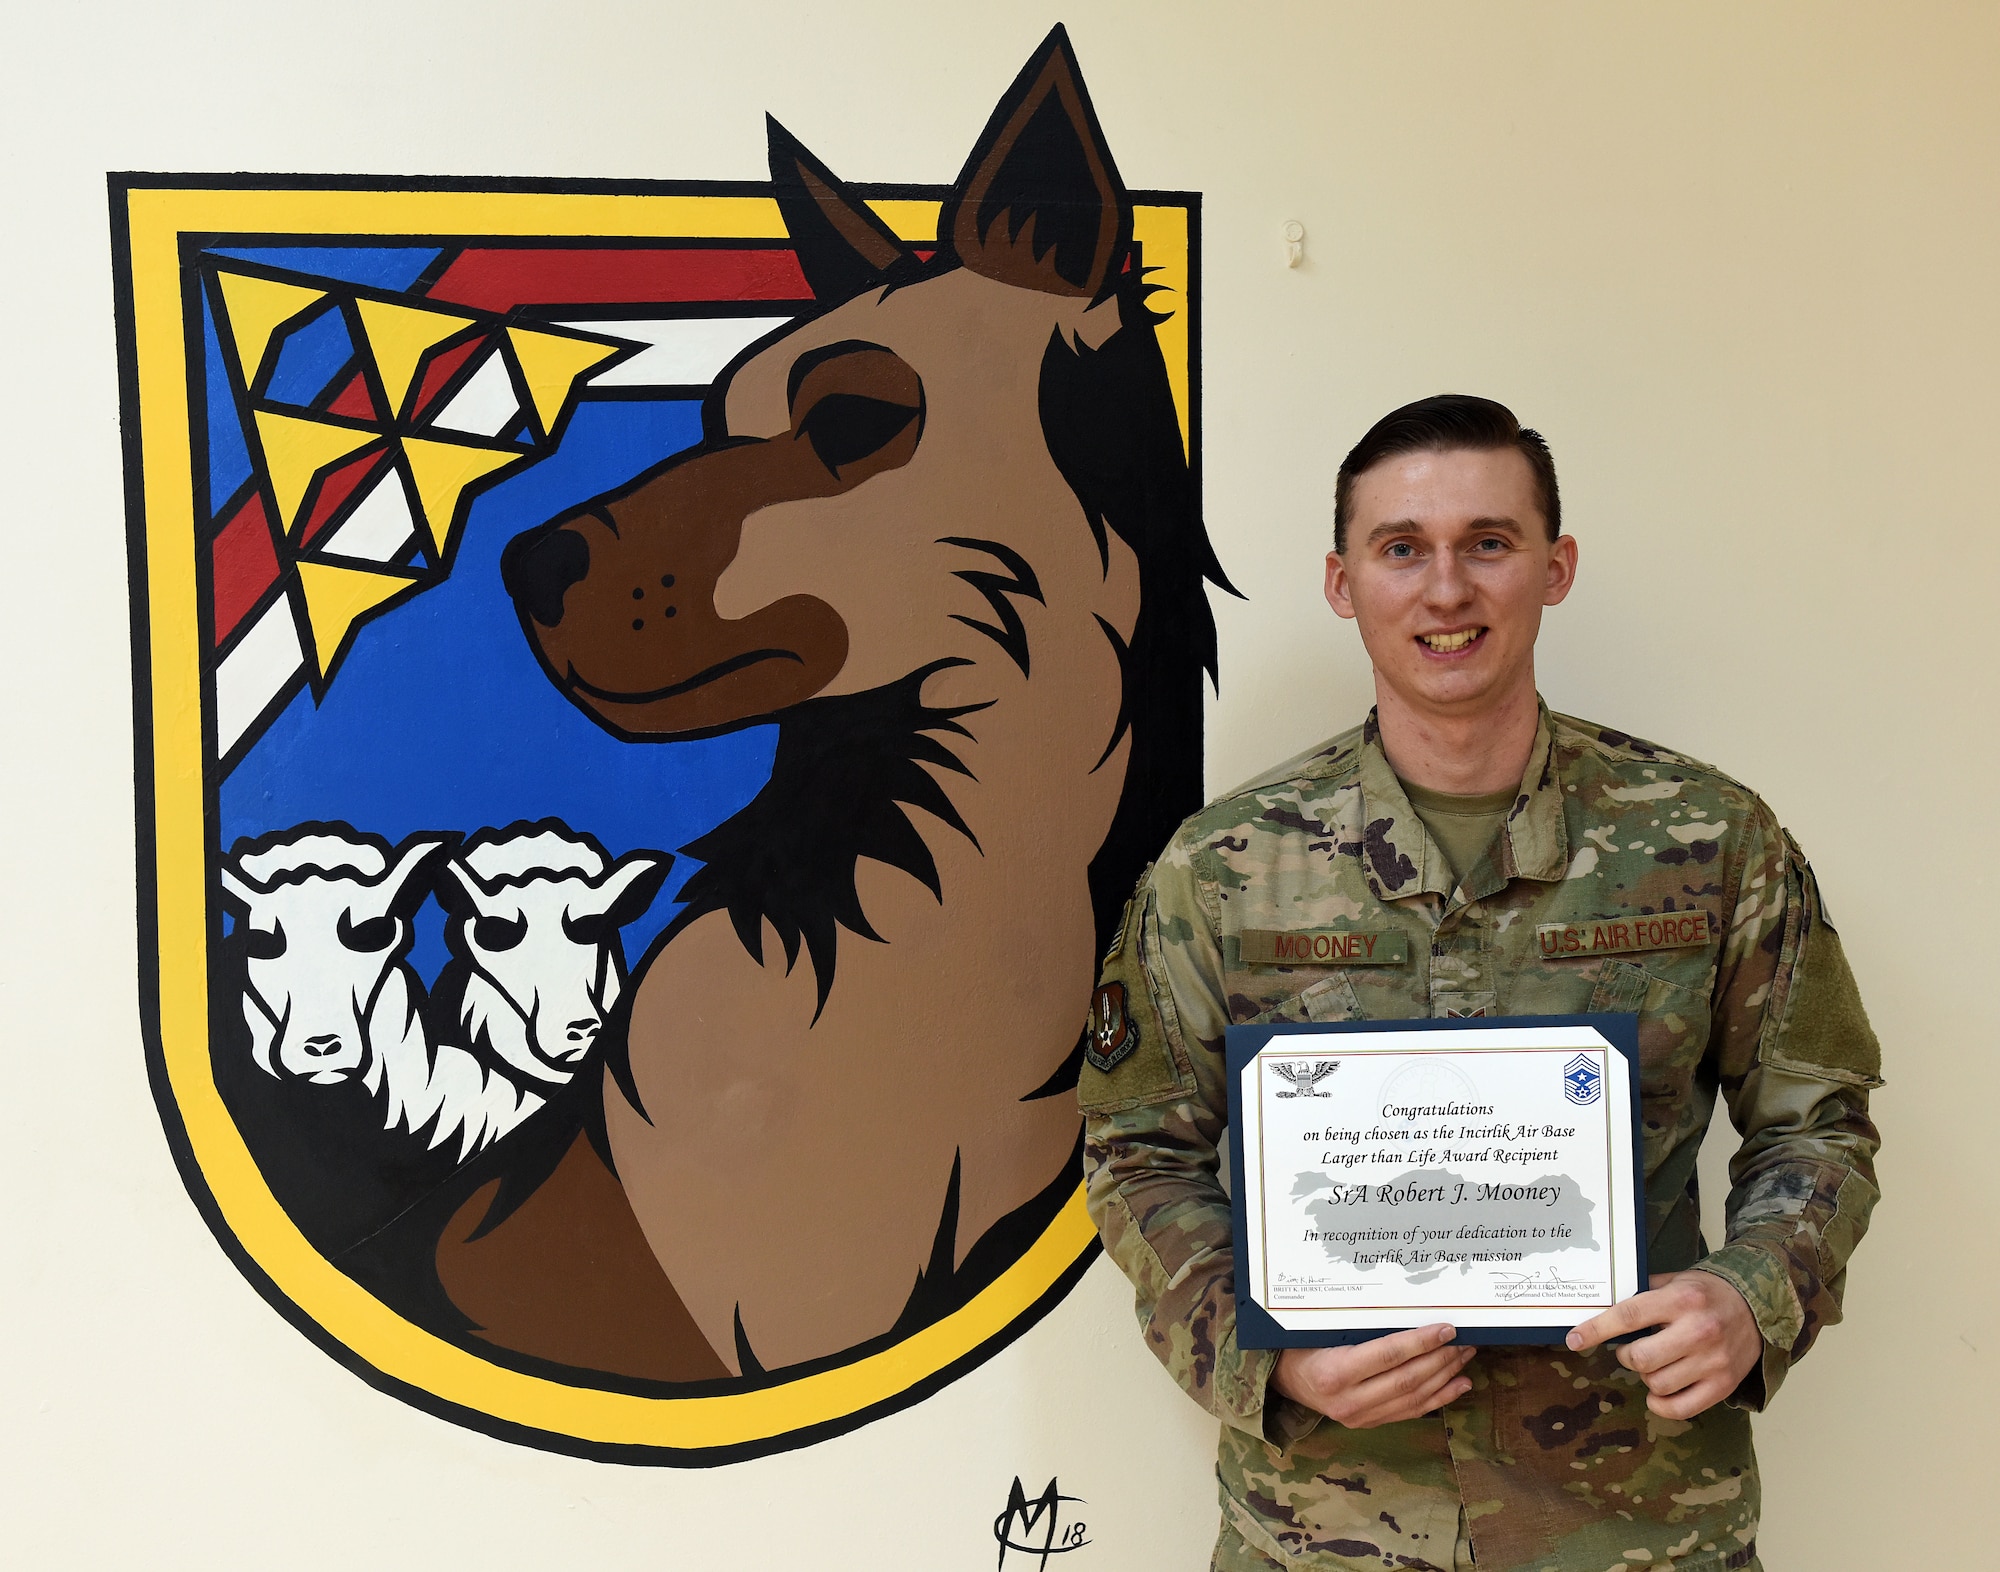 Congratulations to U.S. Air Force Senior Airman Robert Mooney, 39th Security Forces Squadron base defense operations center controller, for winning the Deployed Larger Than Life Award at Incirlik Air Base, Turkey, Feb. 8, 2019.